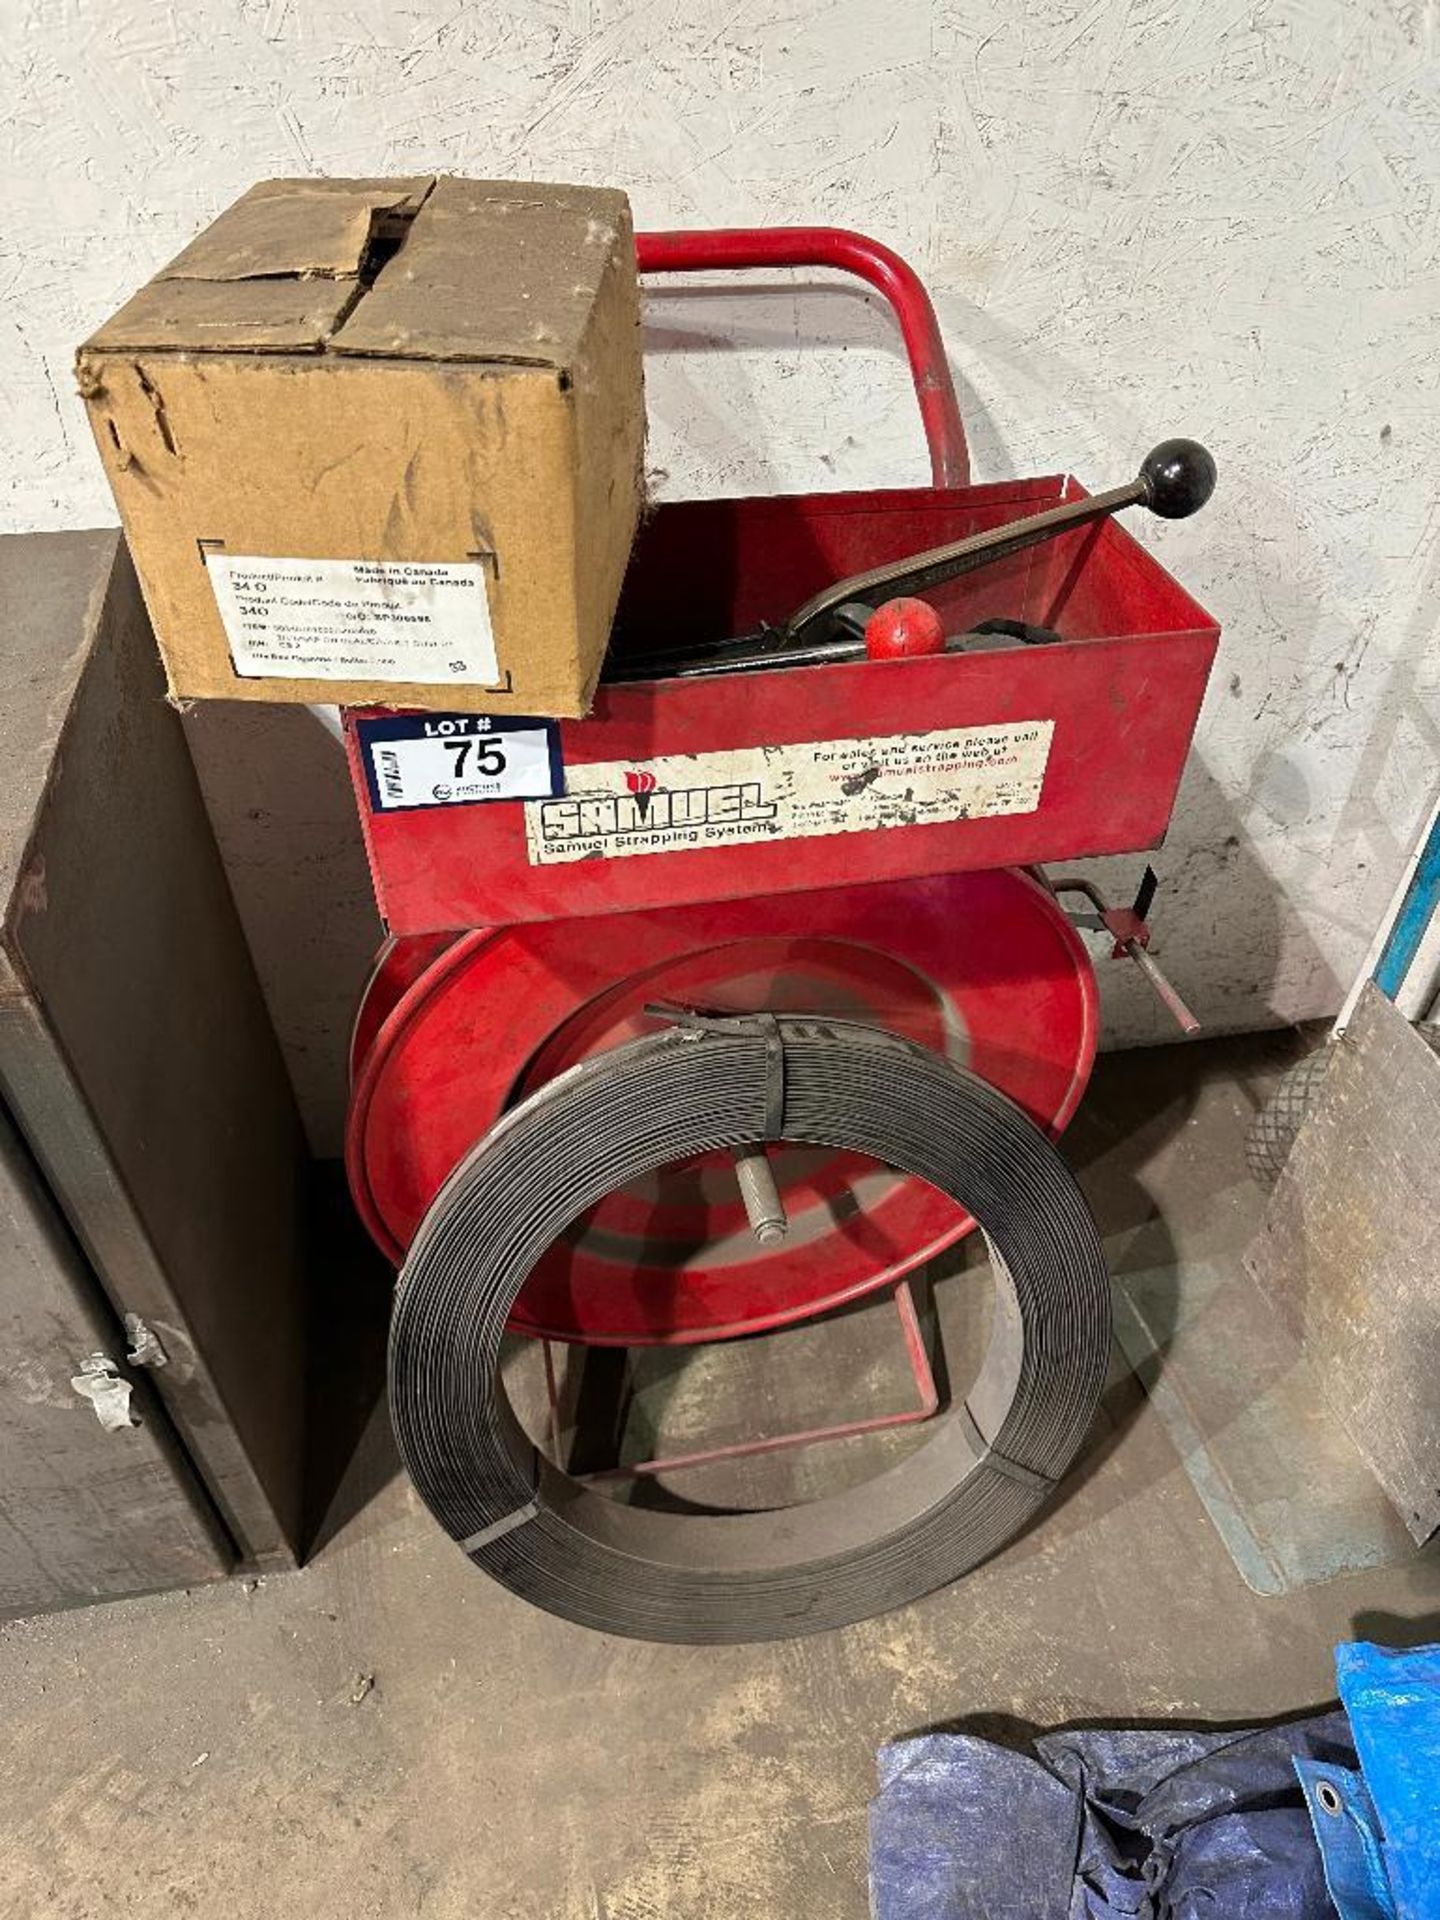 Steel Banding Cart w/ Tensioner, Crimper, Box of Clips, Steel Strapping, etc.